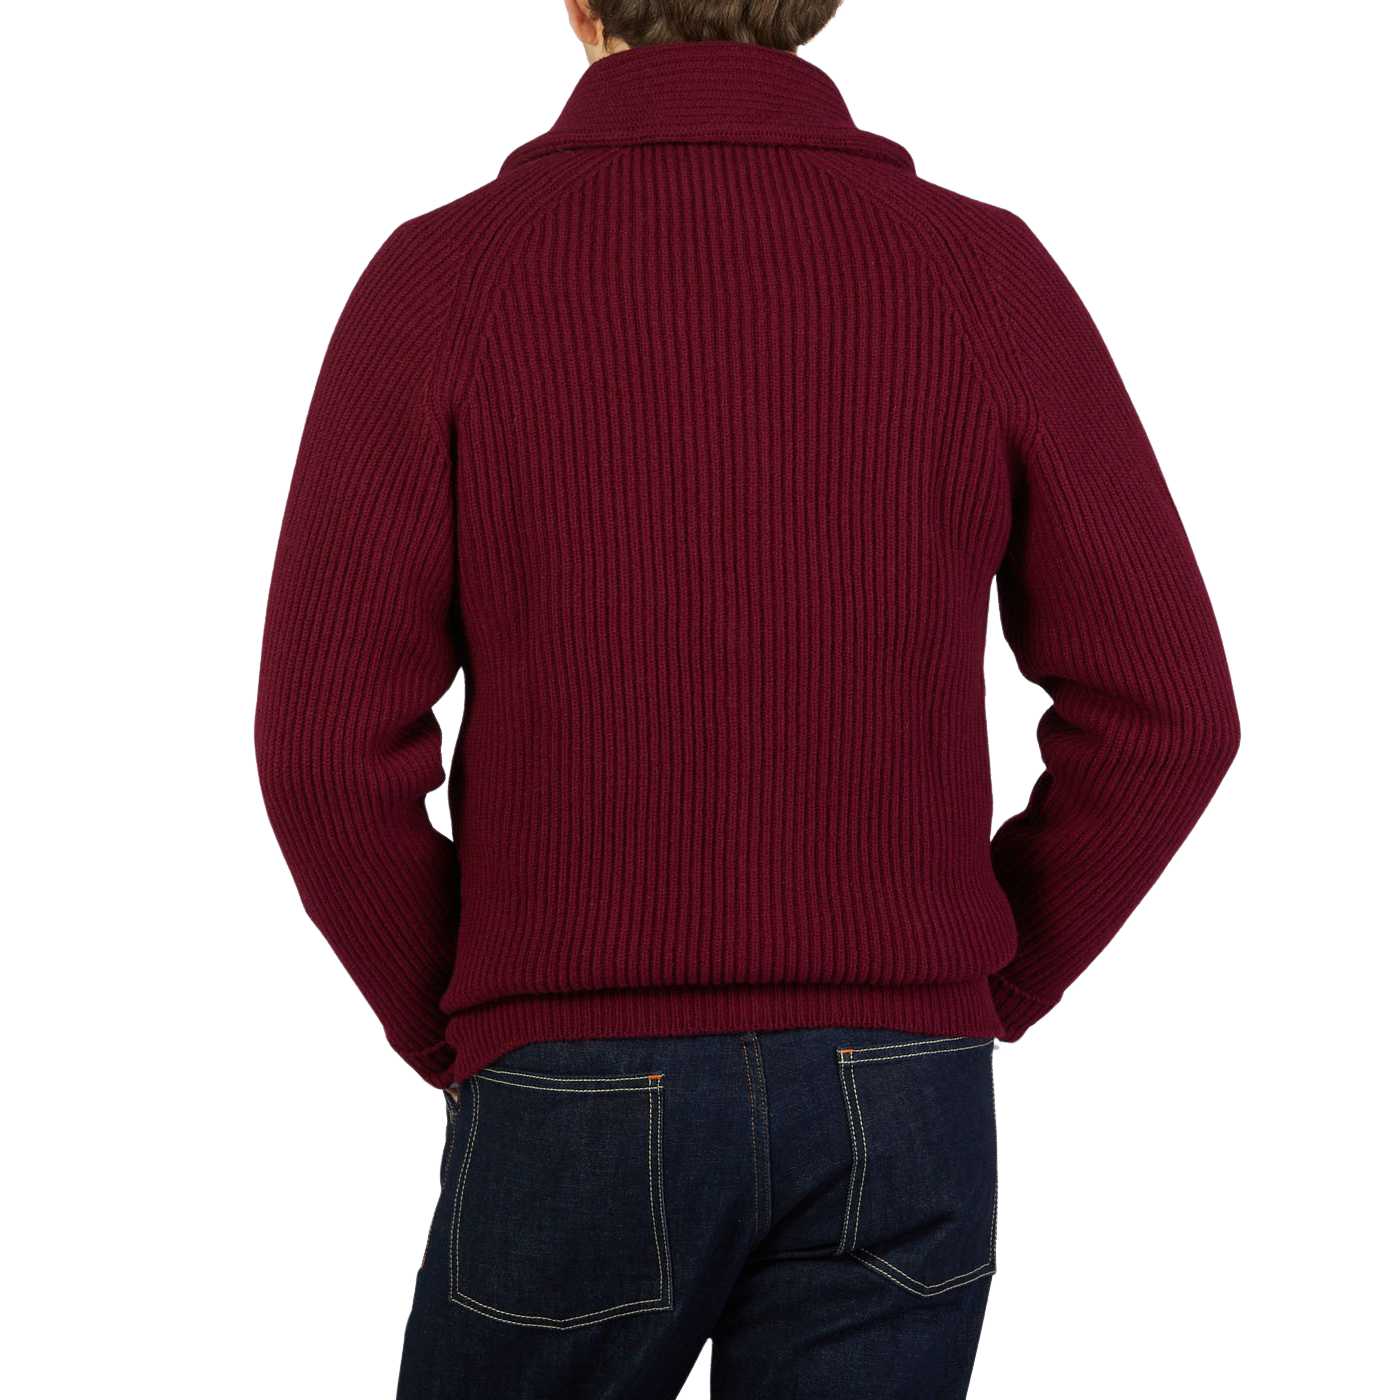 The back view of a man wearing a maroon William Lockie Bordeaux Lambswool Shawl Collar Cardigan.